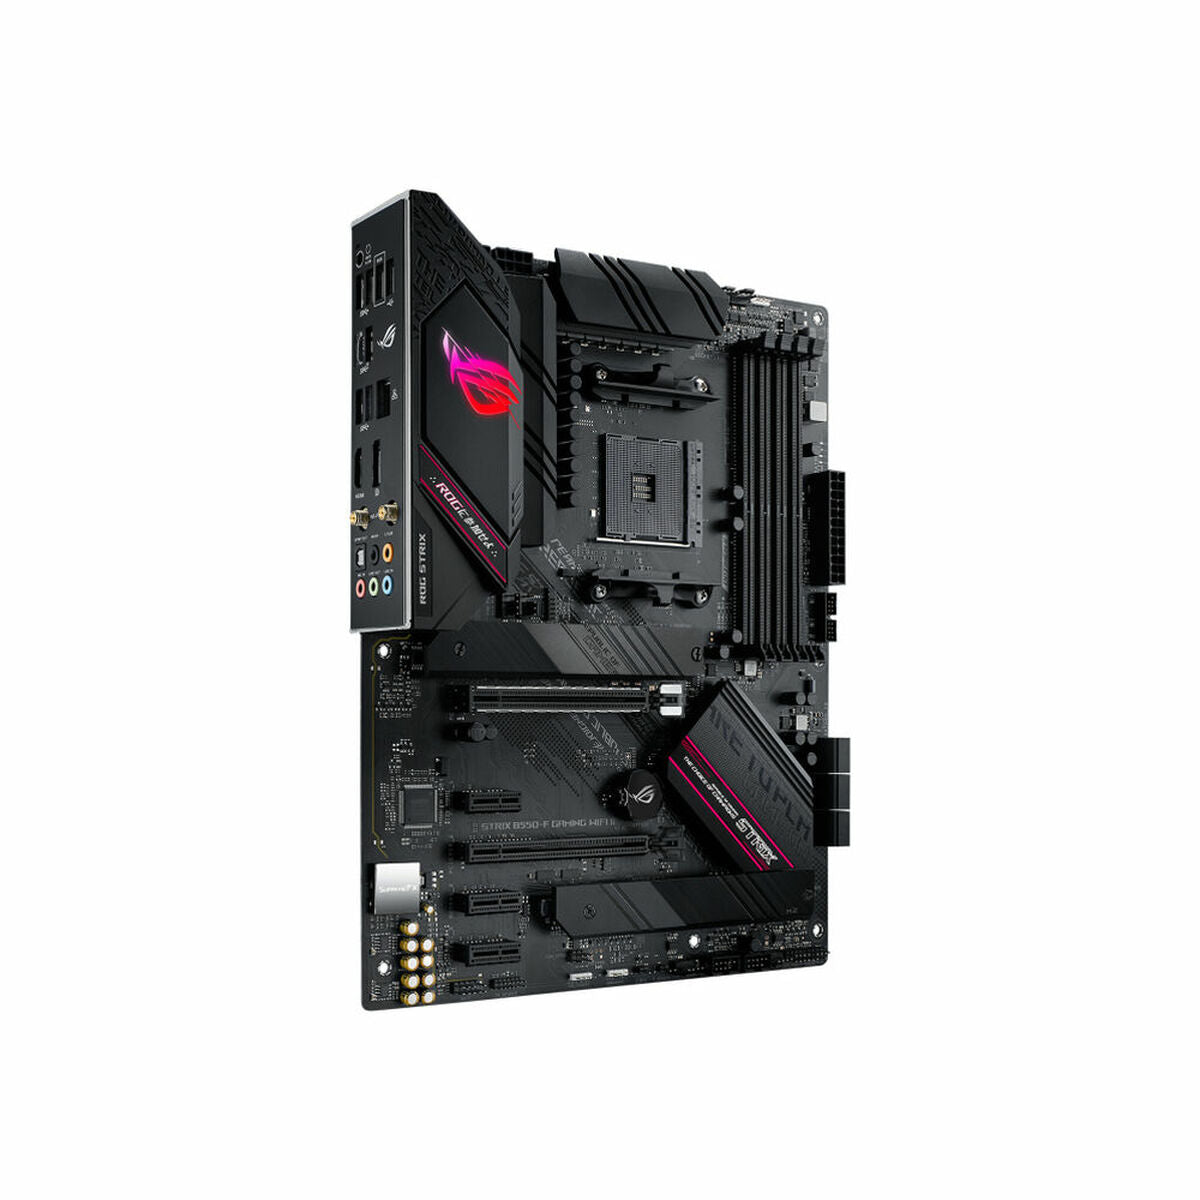 Motherboard Asus ROG STRIX B550-F GAMING WIFI II AMD B550 AMD AMD AM4, Asus, Computing, Components, motherboard-asus-rog-strix-b550-f-gaming-wifi-ii-amd-b550-amd-amd-am4, Brand_Asus, category-reference-2609, category-reference-2803, category-reference-2804, category-reference-t-19685, category-reference-t-19912, category-reference-t-21360, computers / components, Condition_NEW, Price_200 - 300, Teleworking, RiotNook